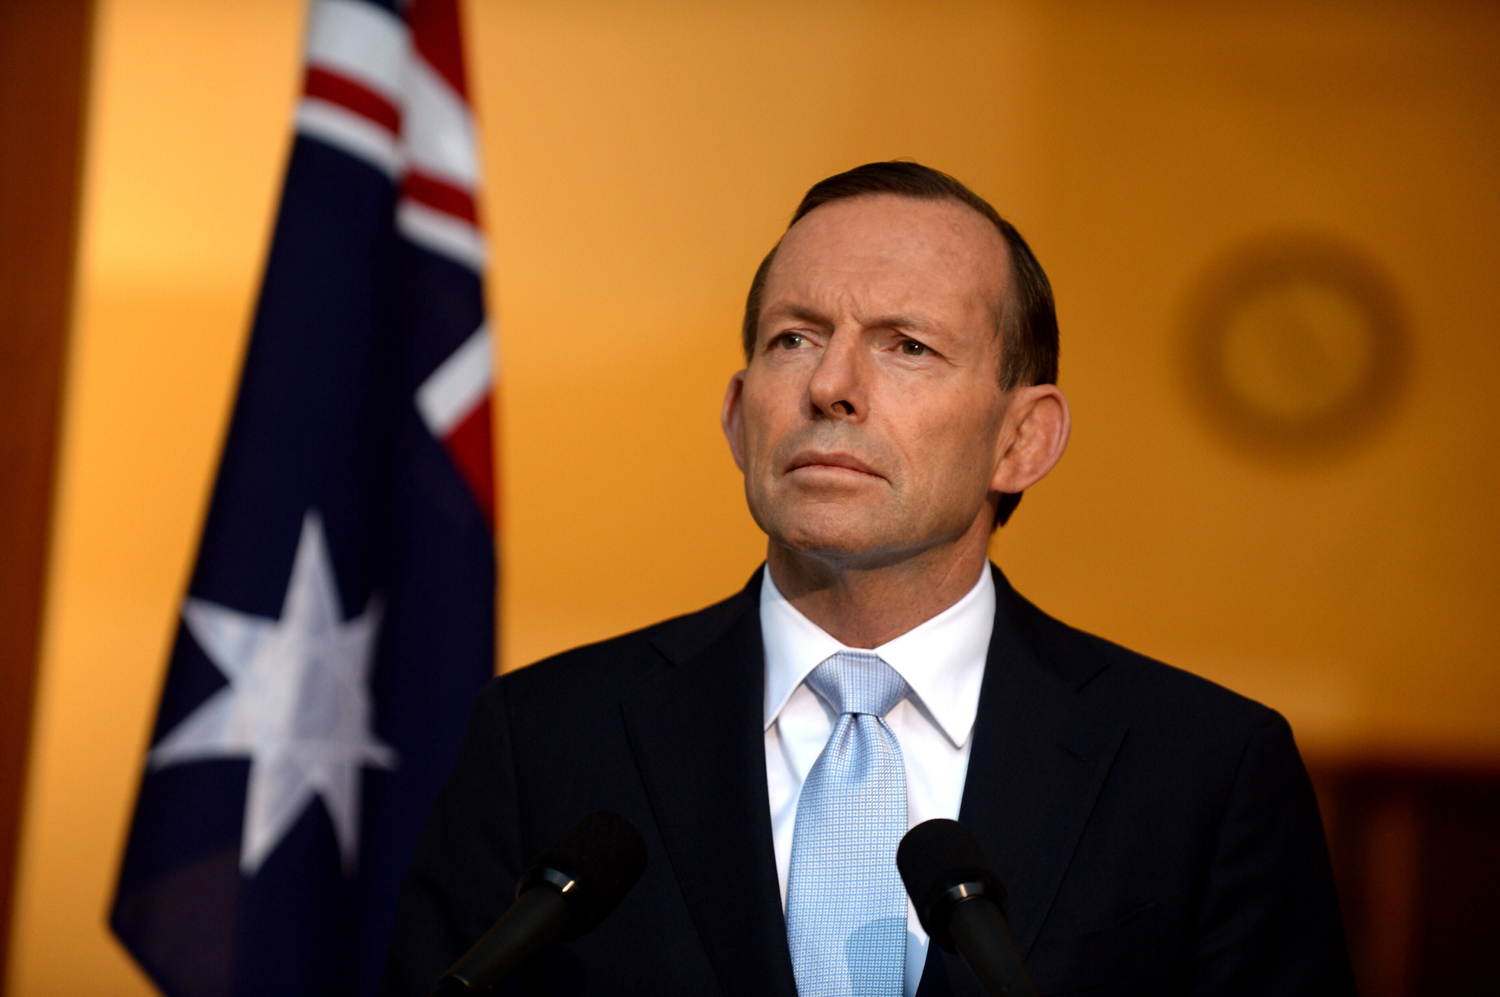 Australian Prime Minister Tony Abbott speaks about the downing of Malaysia Airlines Flight 17 in Ukraine during a press conference in Canberra, Australia on July 18, 2014. (Alan Porritt — EPA)